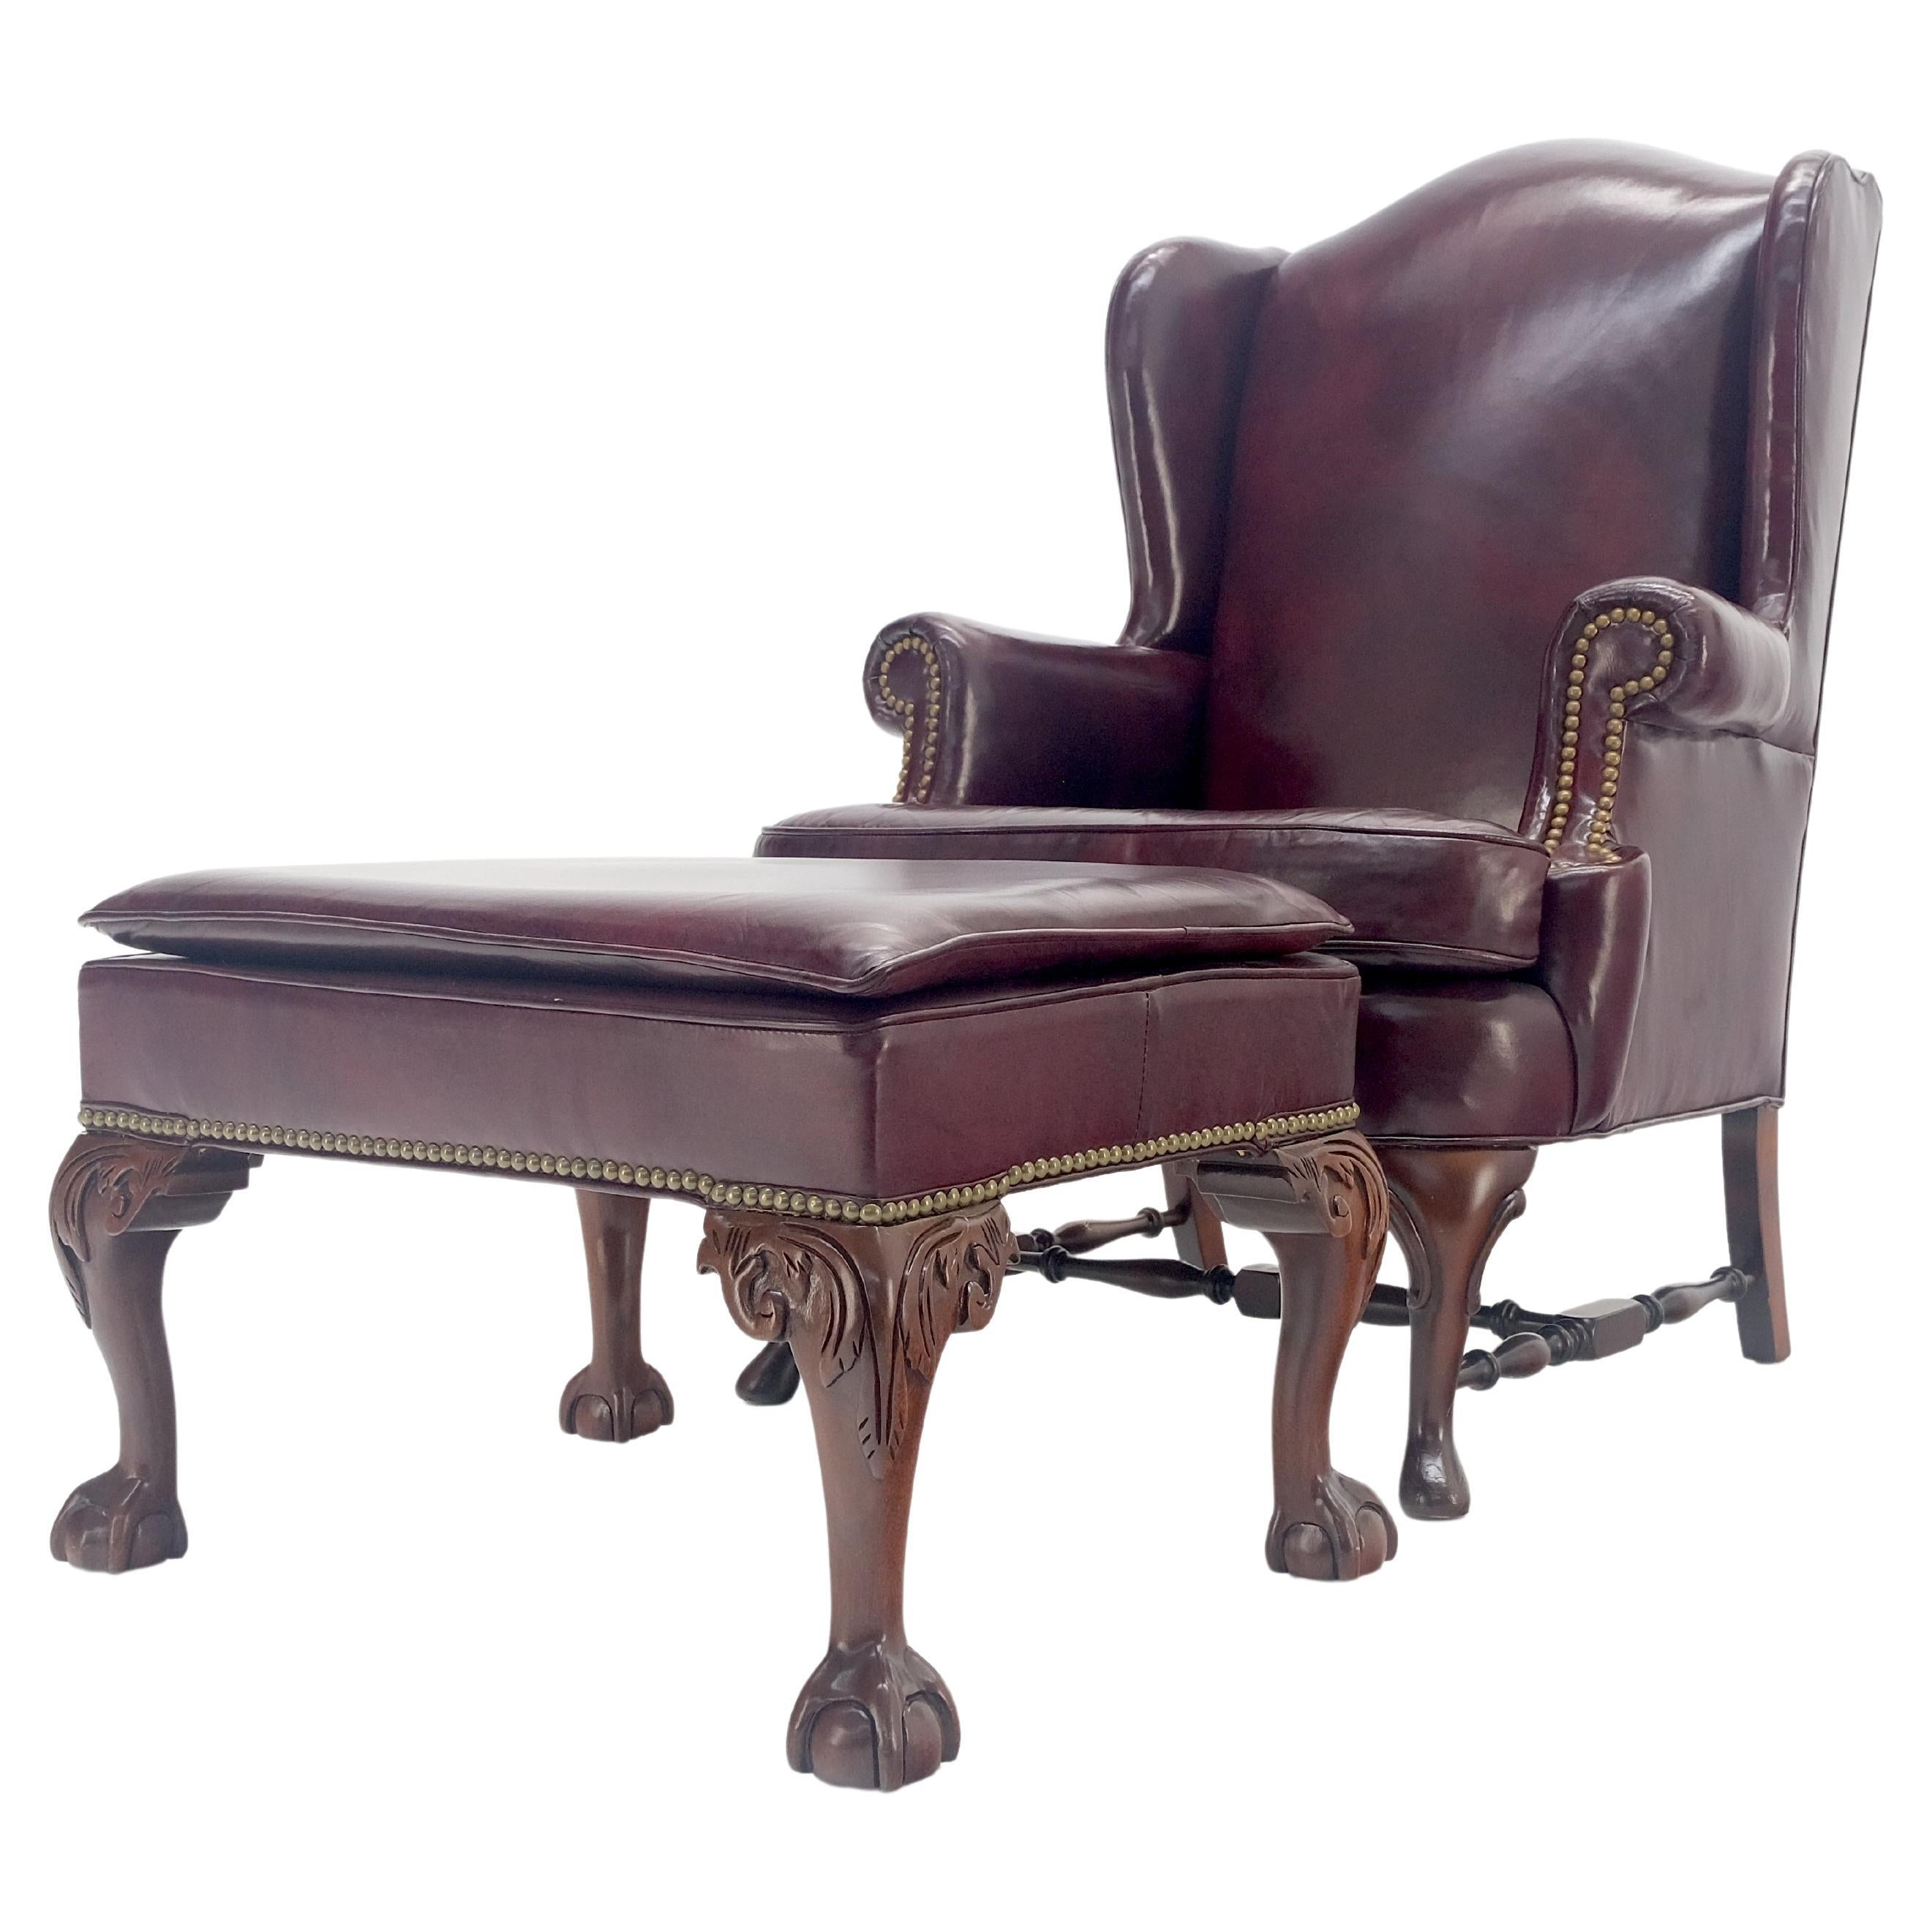 Kindel Burgundy Leather Upholstery Carved Mahogany Legs Wingback Chair & Ottoman